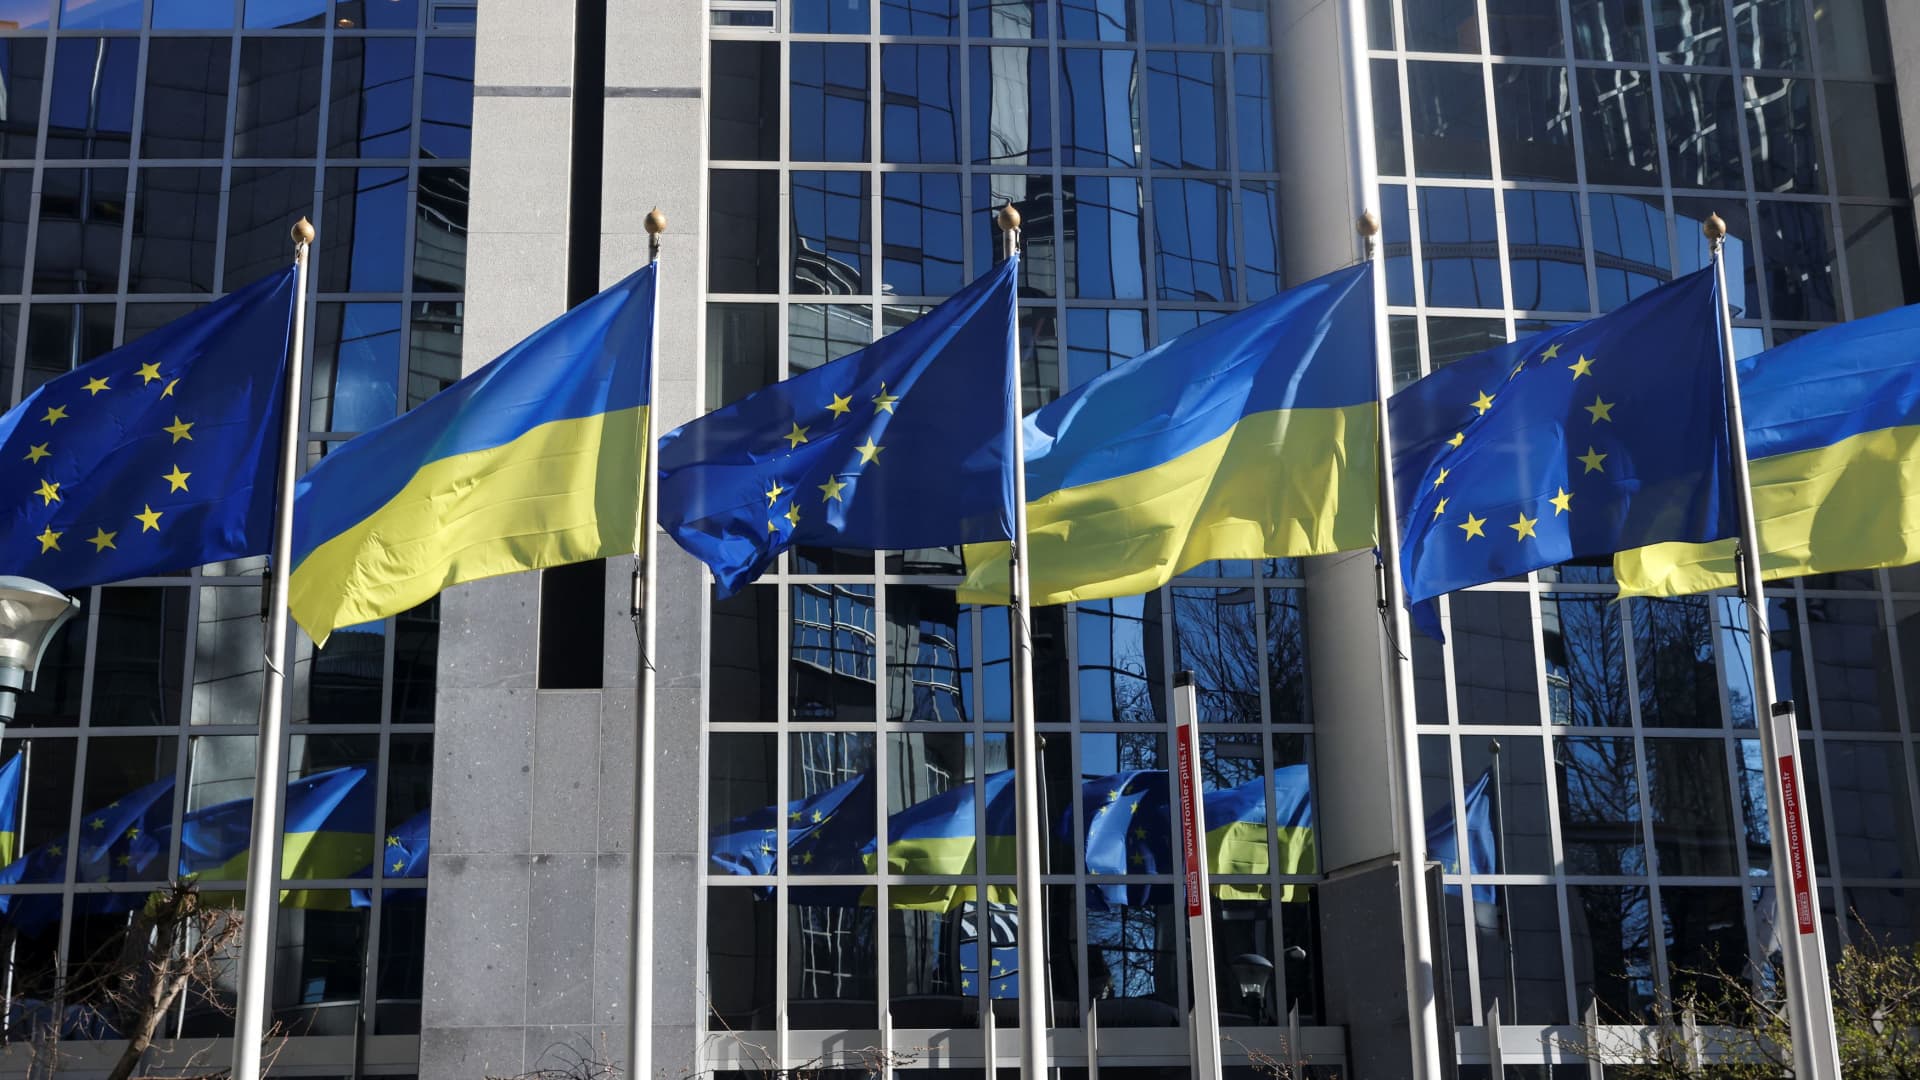 Ukraine should become a membership candidate to join the EU, commission says